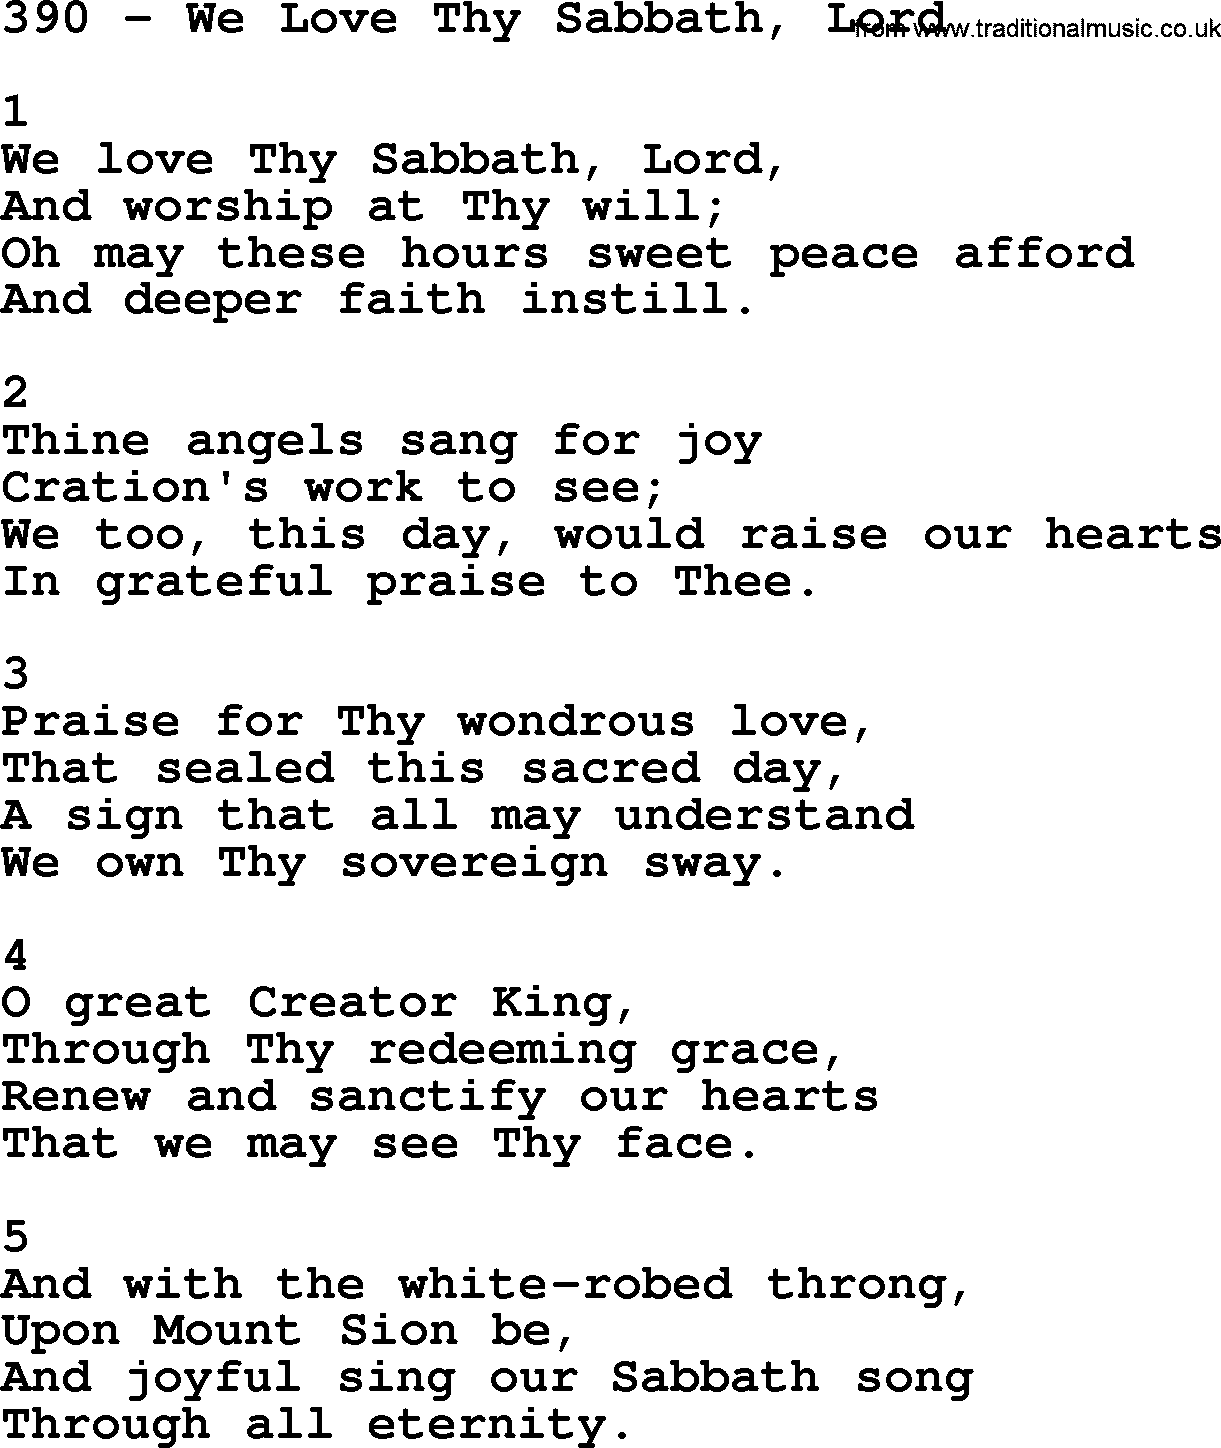 Complete Adventis Hymnal, title: 390-We Love Thy Sabbath, Lord, with lyrics, midi, mp3, powerpoints(PPT) and PDF,